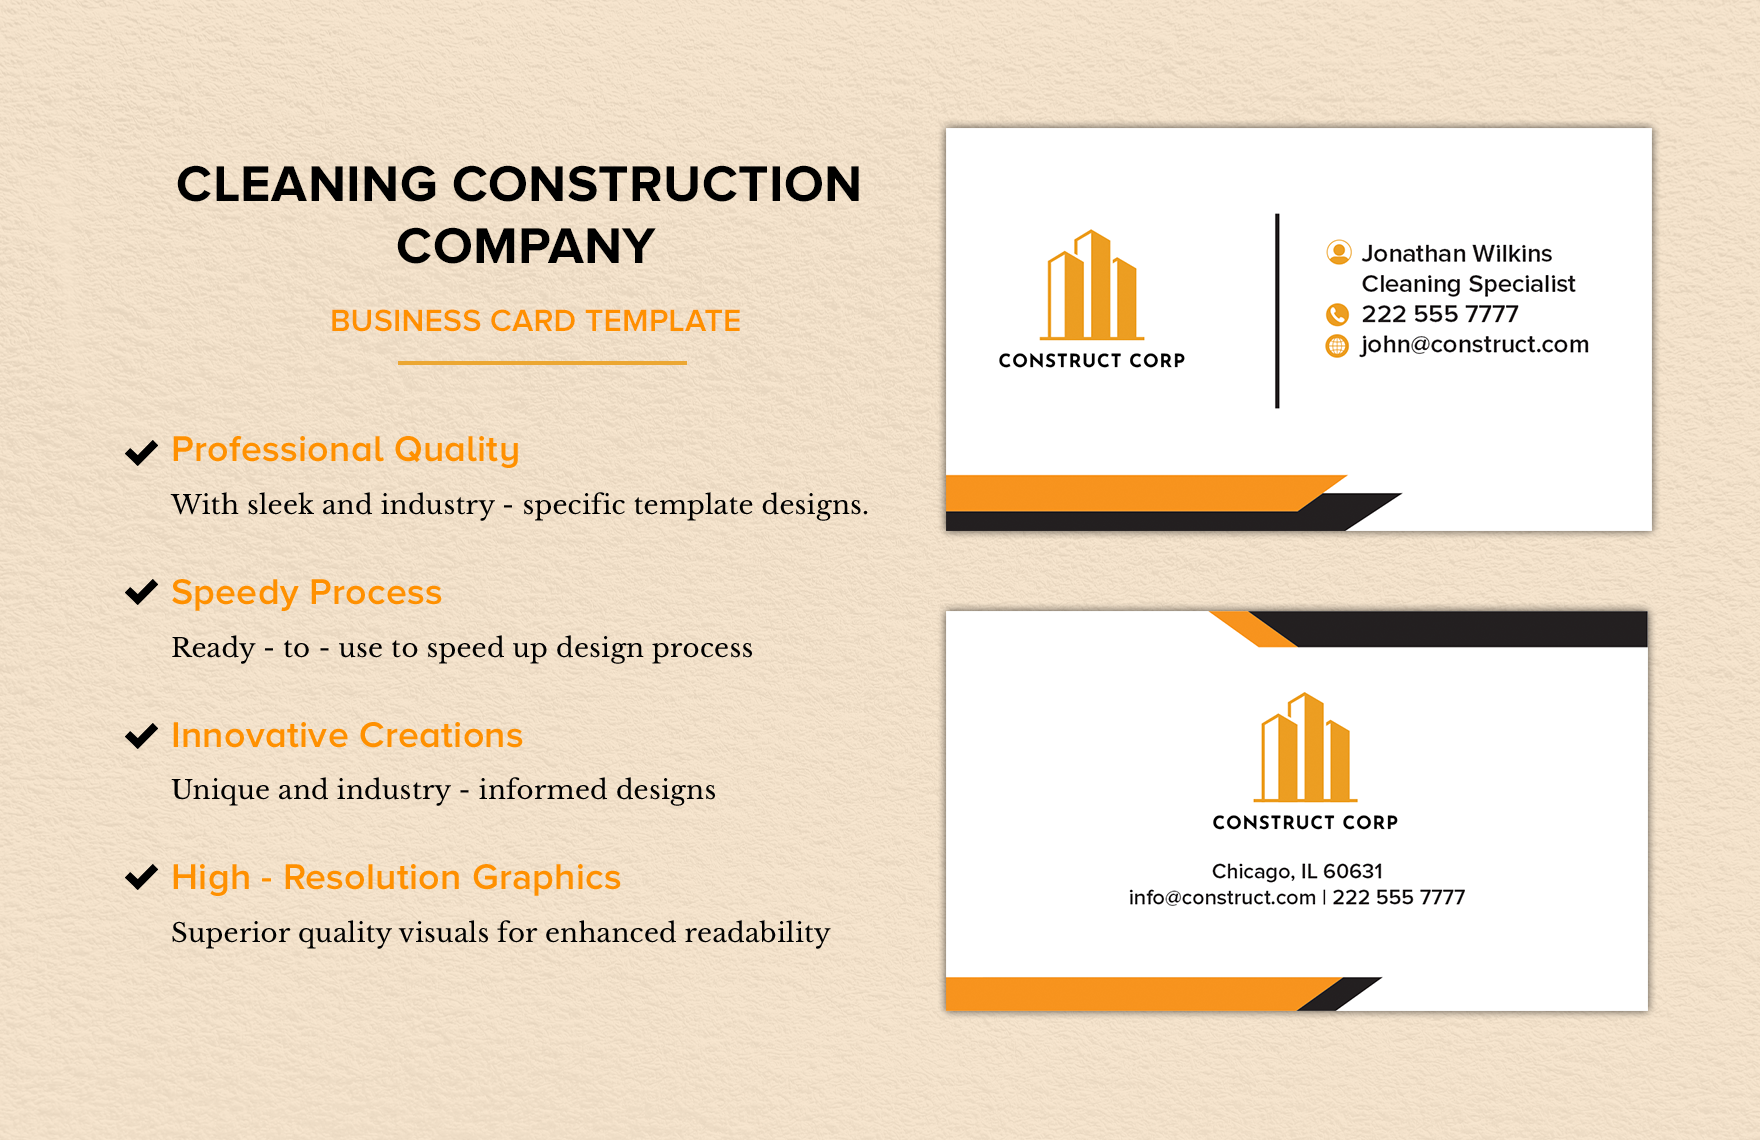 Cleaning Construction Company Business Card Template